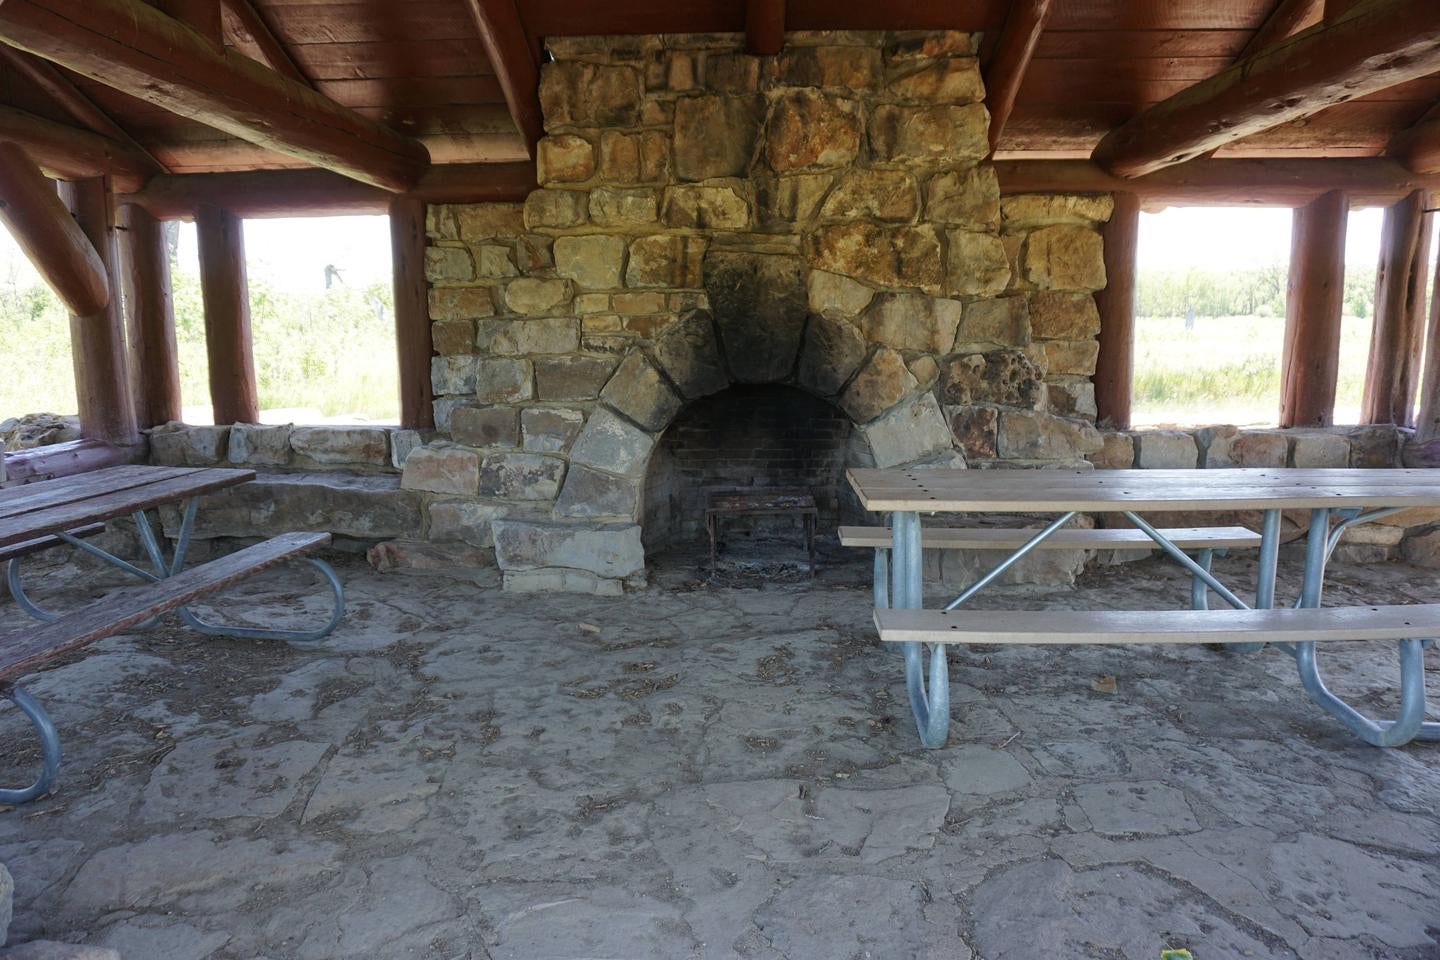 Fire place in a covered shelter. 



Covered shelter for the site. 

Credit: NPS